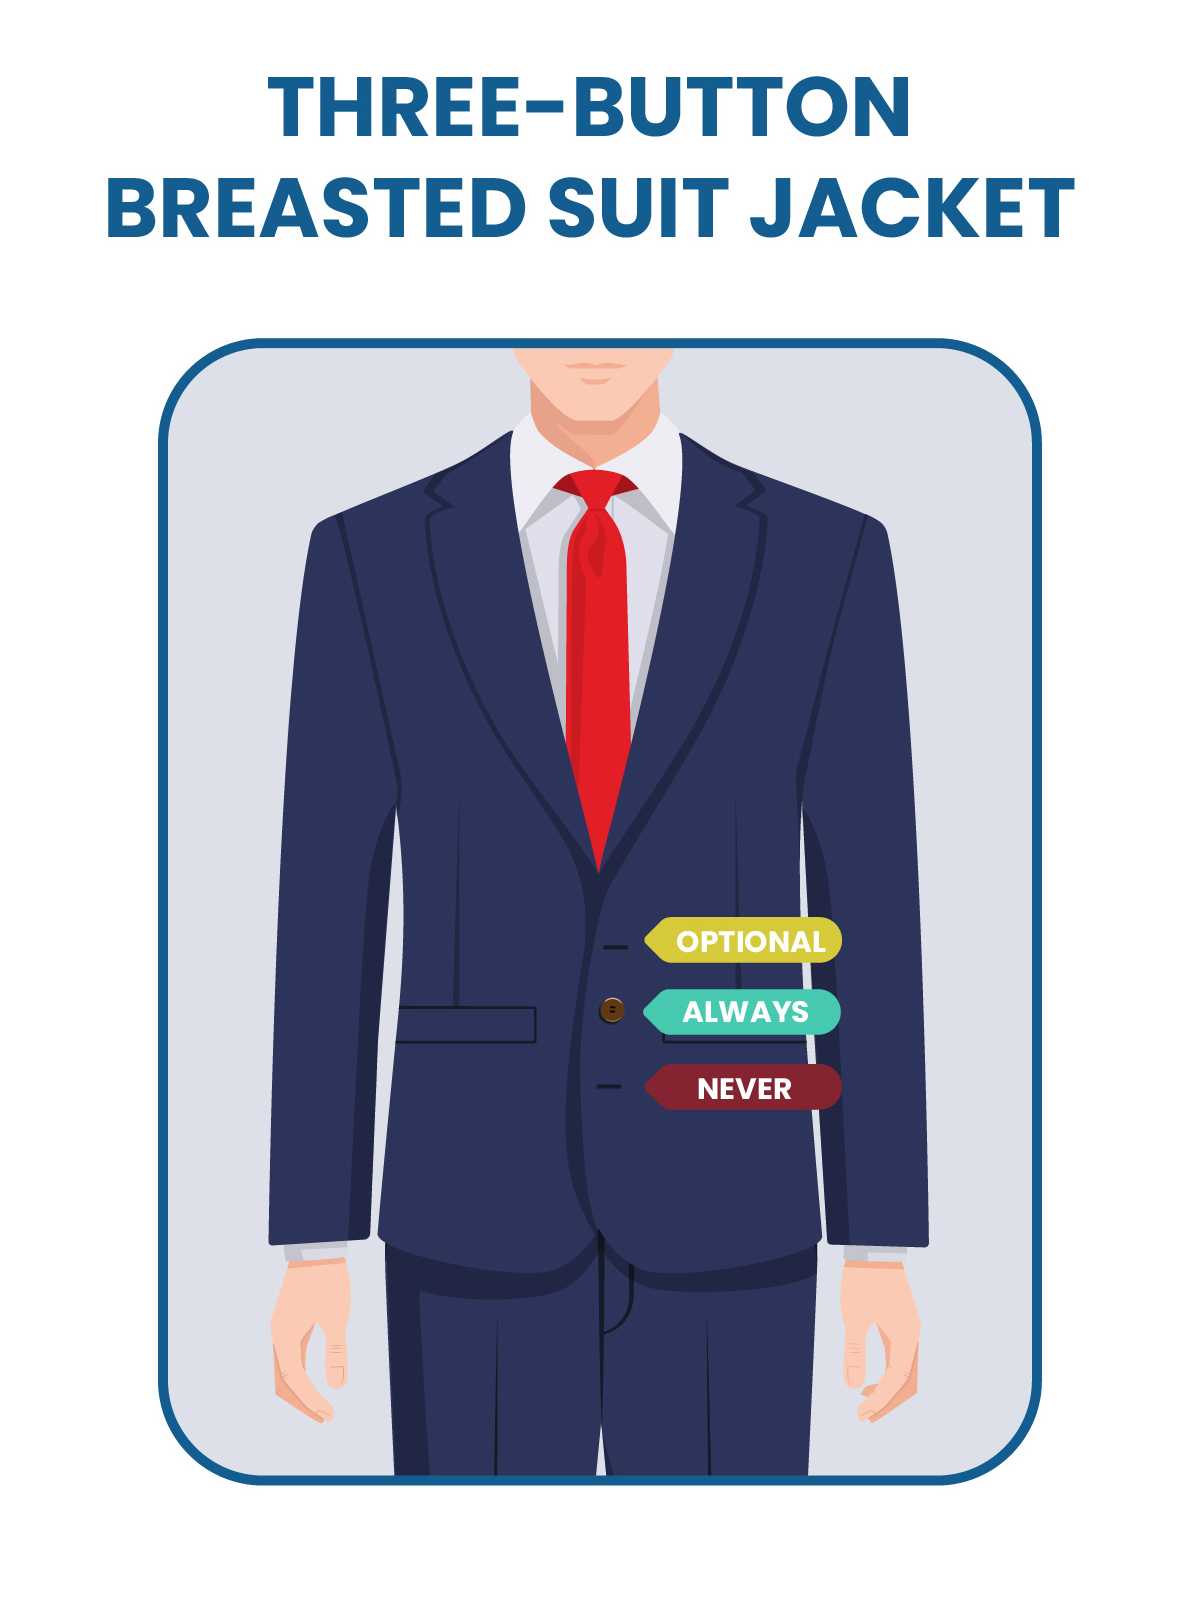 three-button single-breasted suit jacket buttoning rule